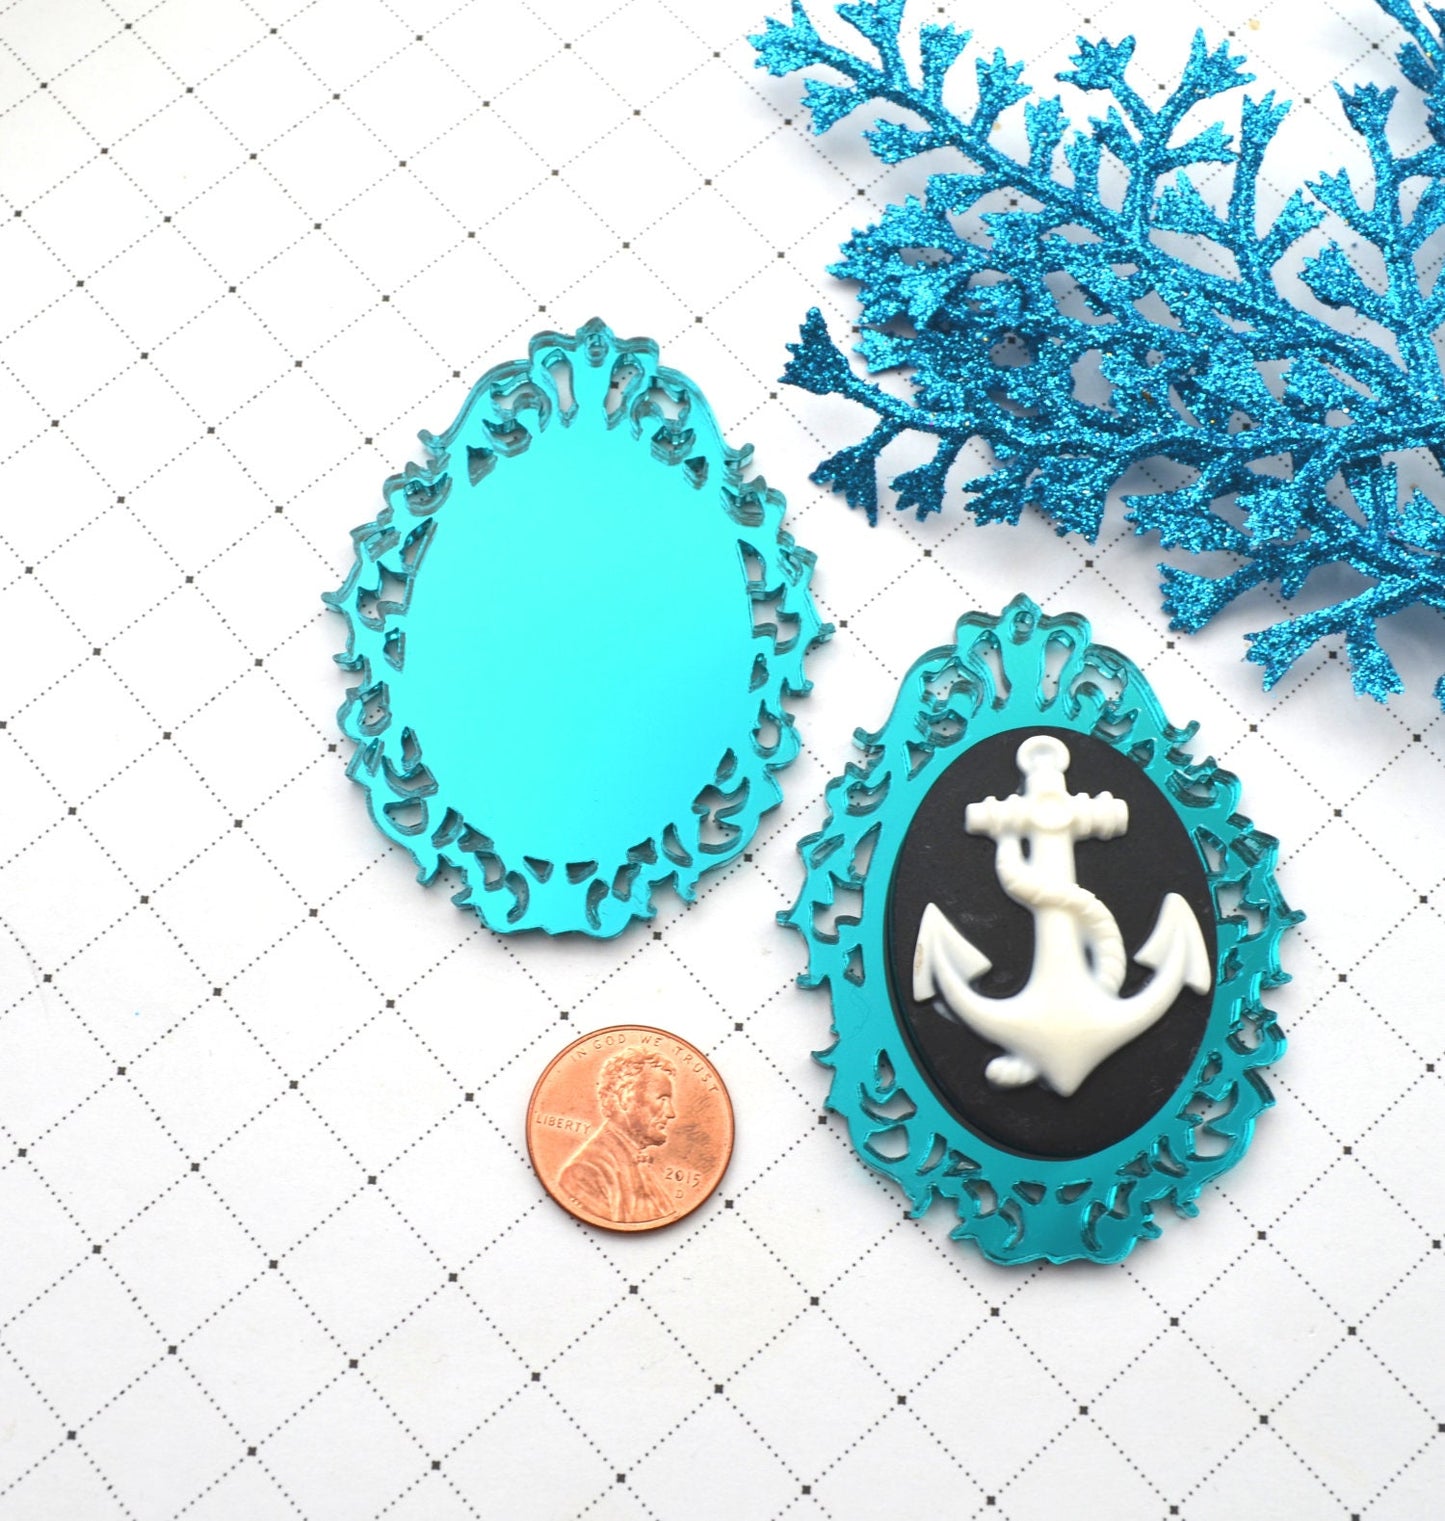 TEAL FILIGREE CAMEOS 30 x 40 mm Ornate Oval Settings Mirrored Laser Cut Acrylic